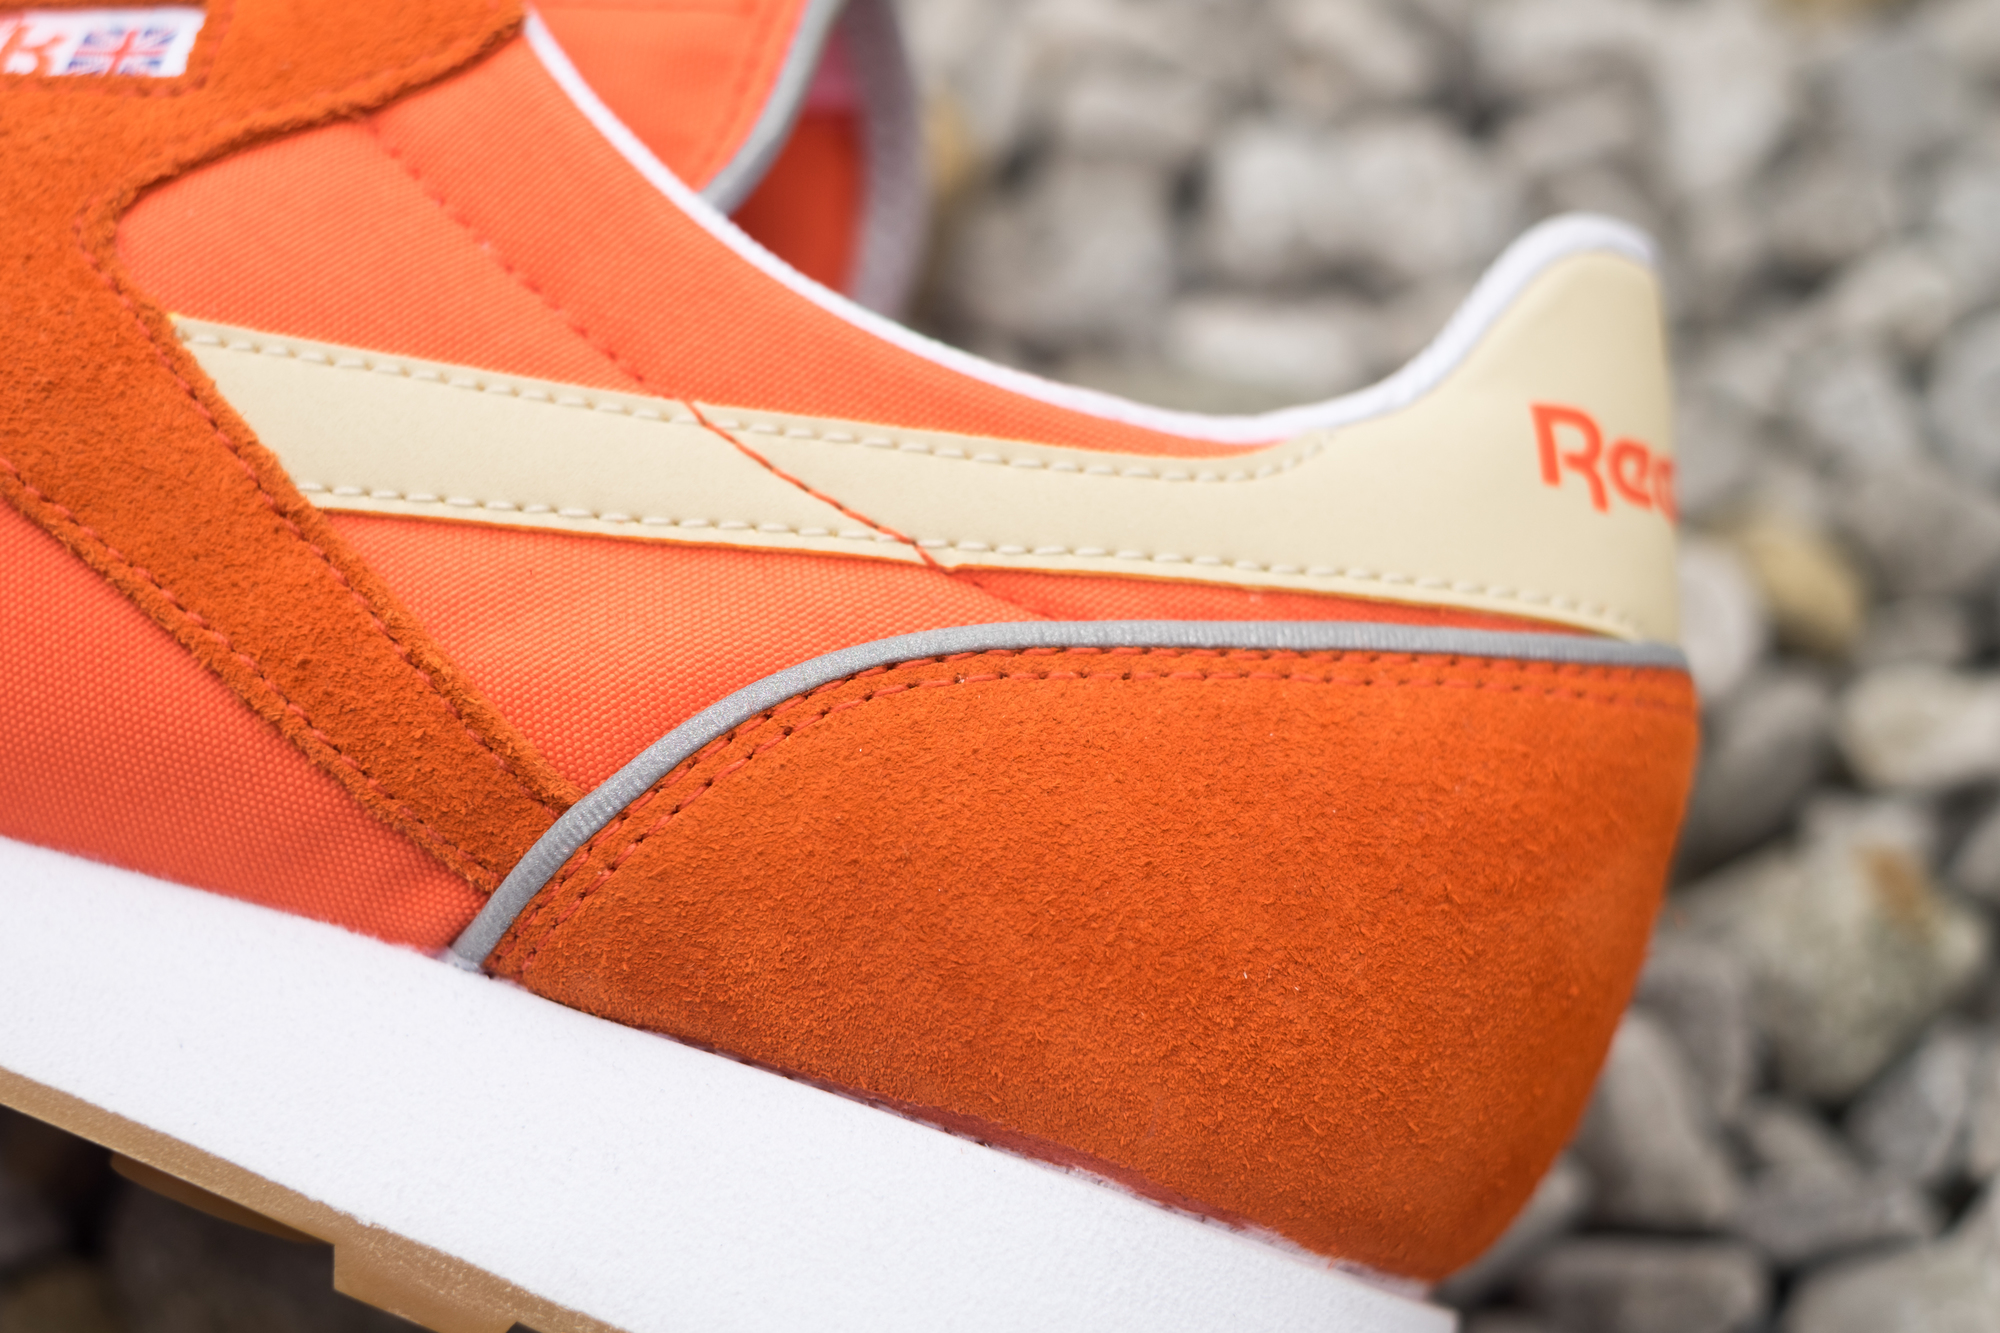 The Reebok Classic 83 Ree-Cut is a size 